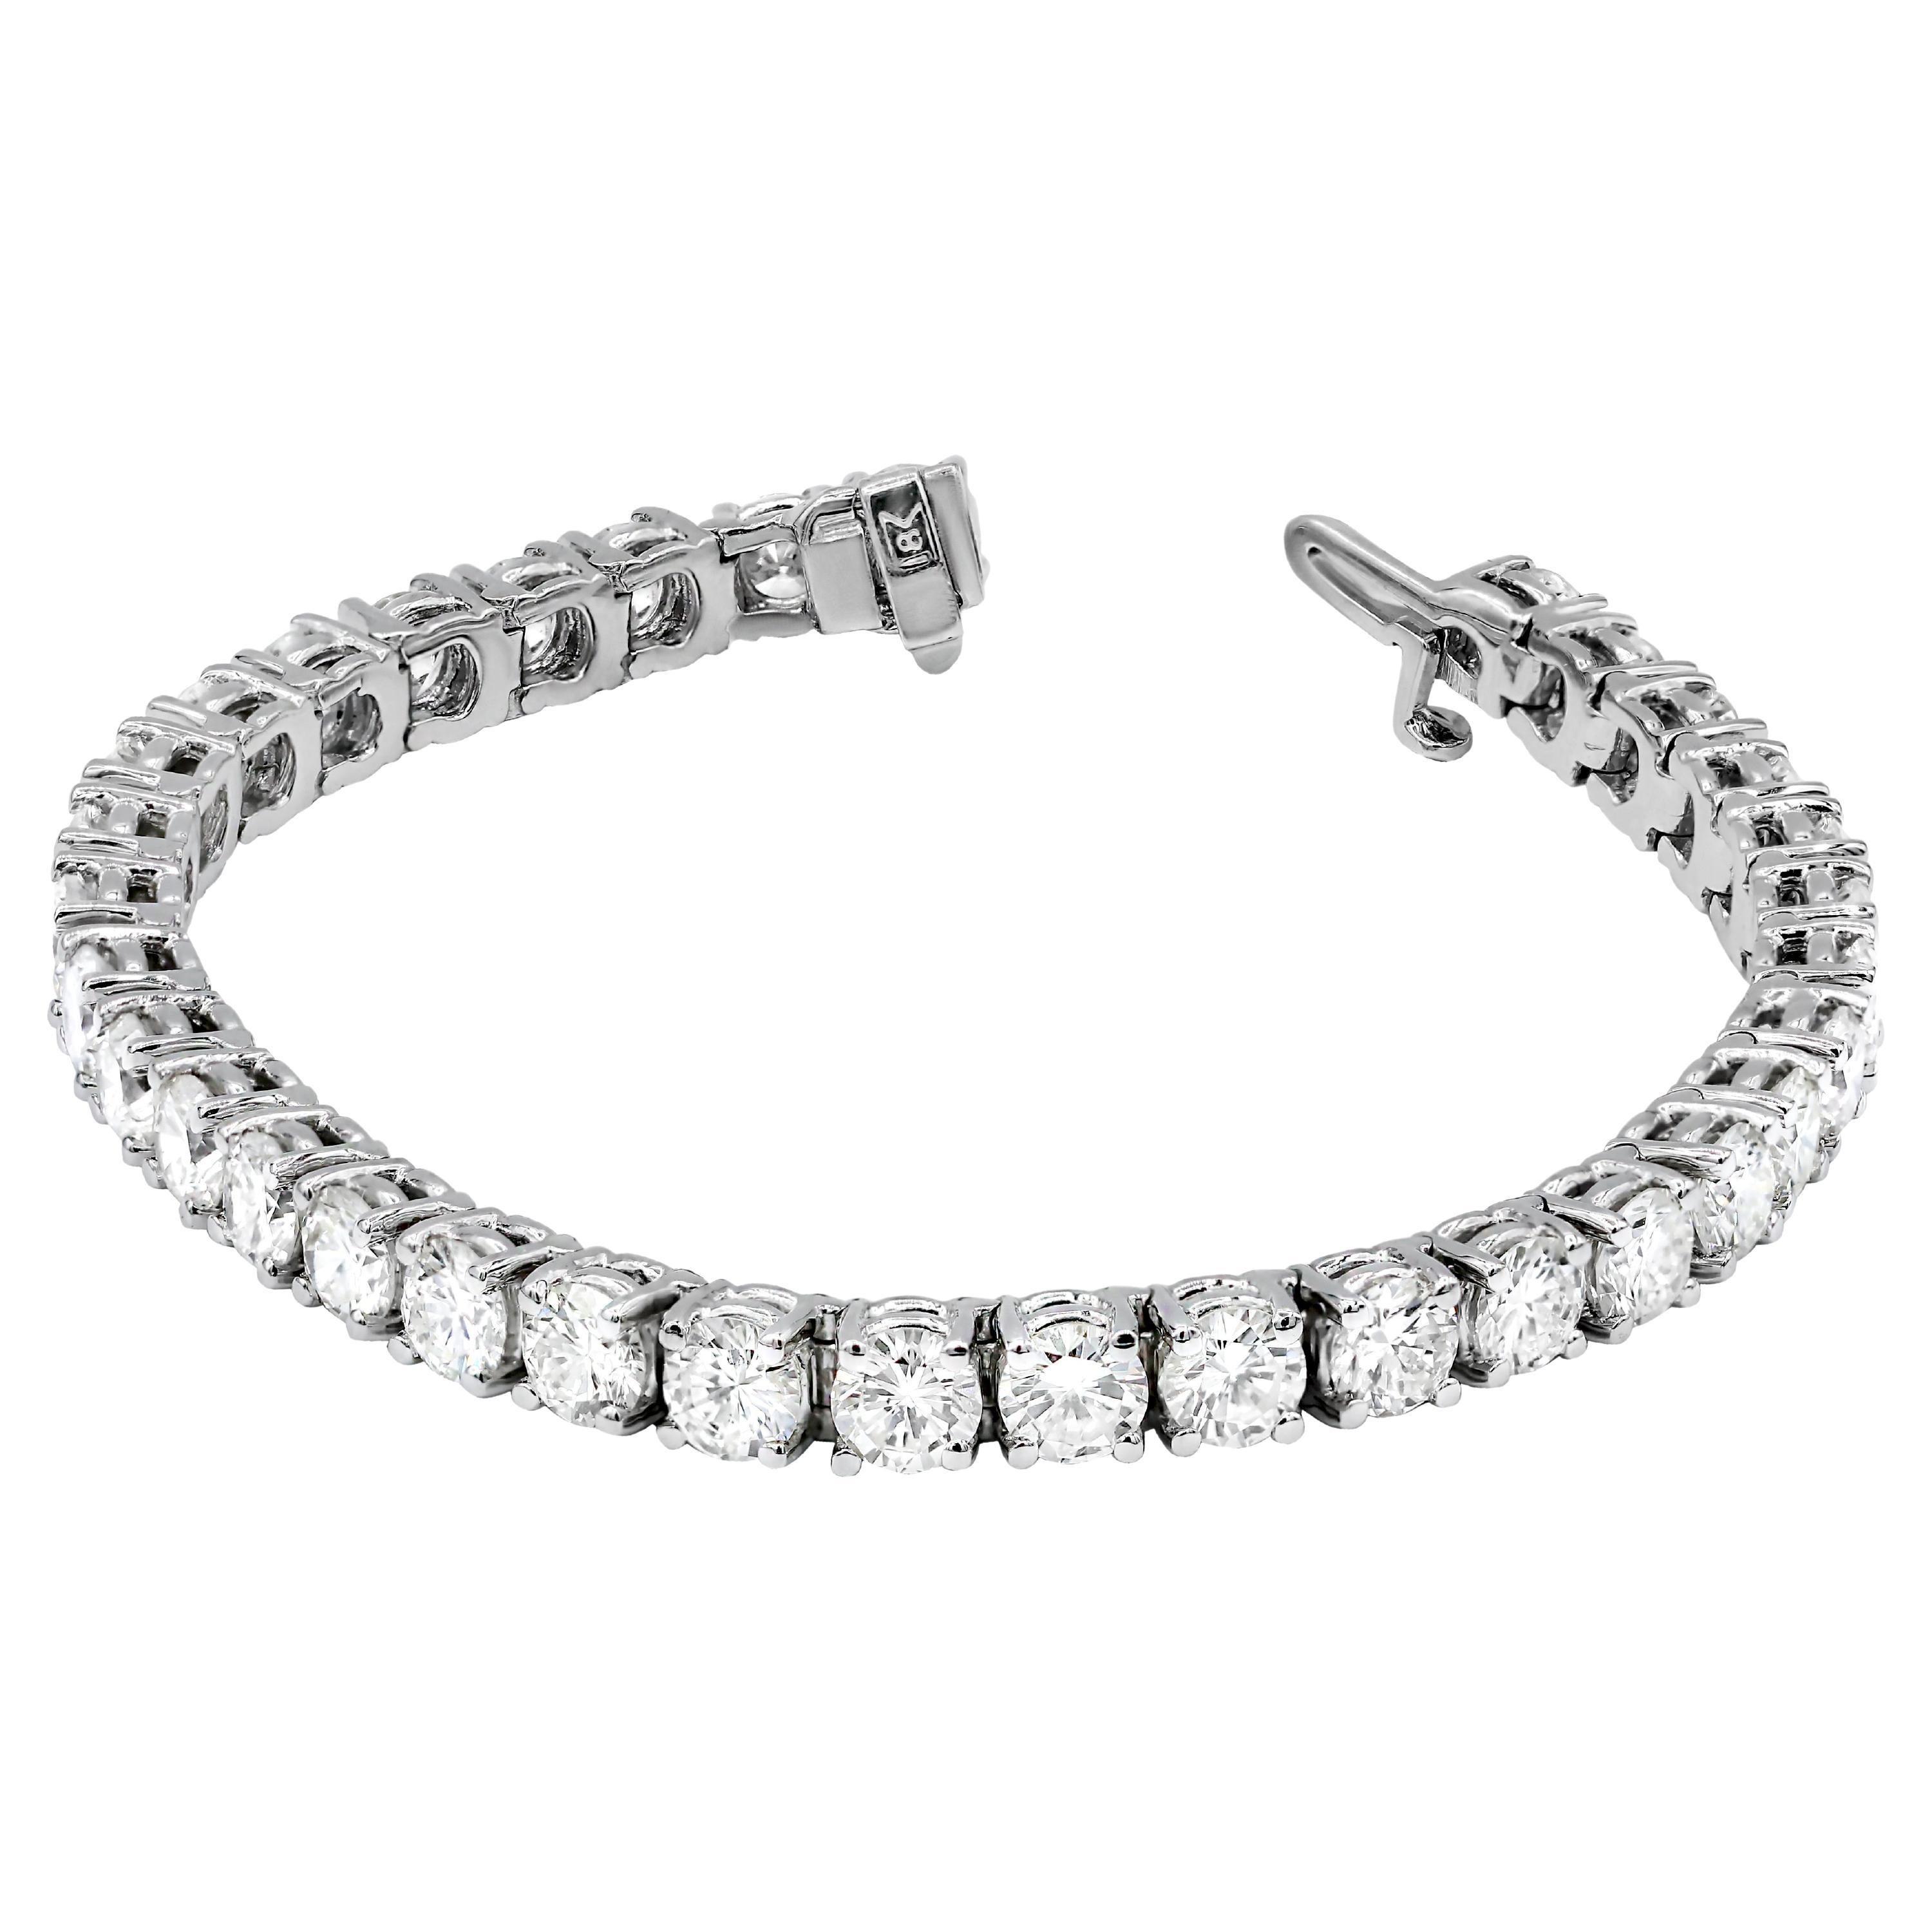 14kt white gold diamond tennis bracelet features 6.00 cts tw of round GH SI.
Diana M. is a leading supplier of top-quality fine jewelry for over 35 years.
Diana M is one-stop shop for all your jewelry shopping, carrying line of diamond rings,